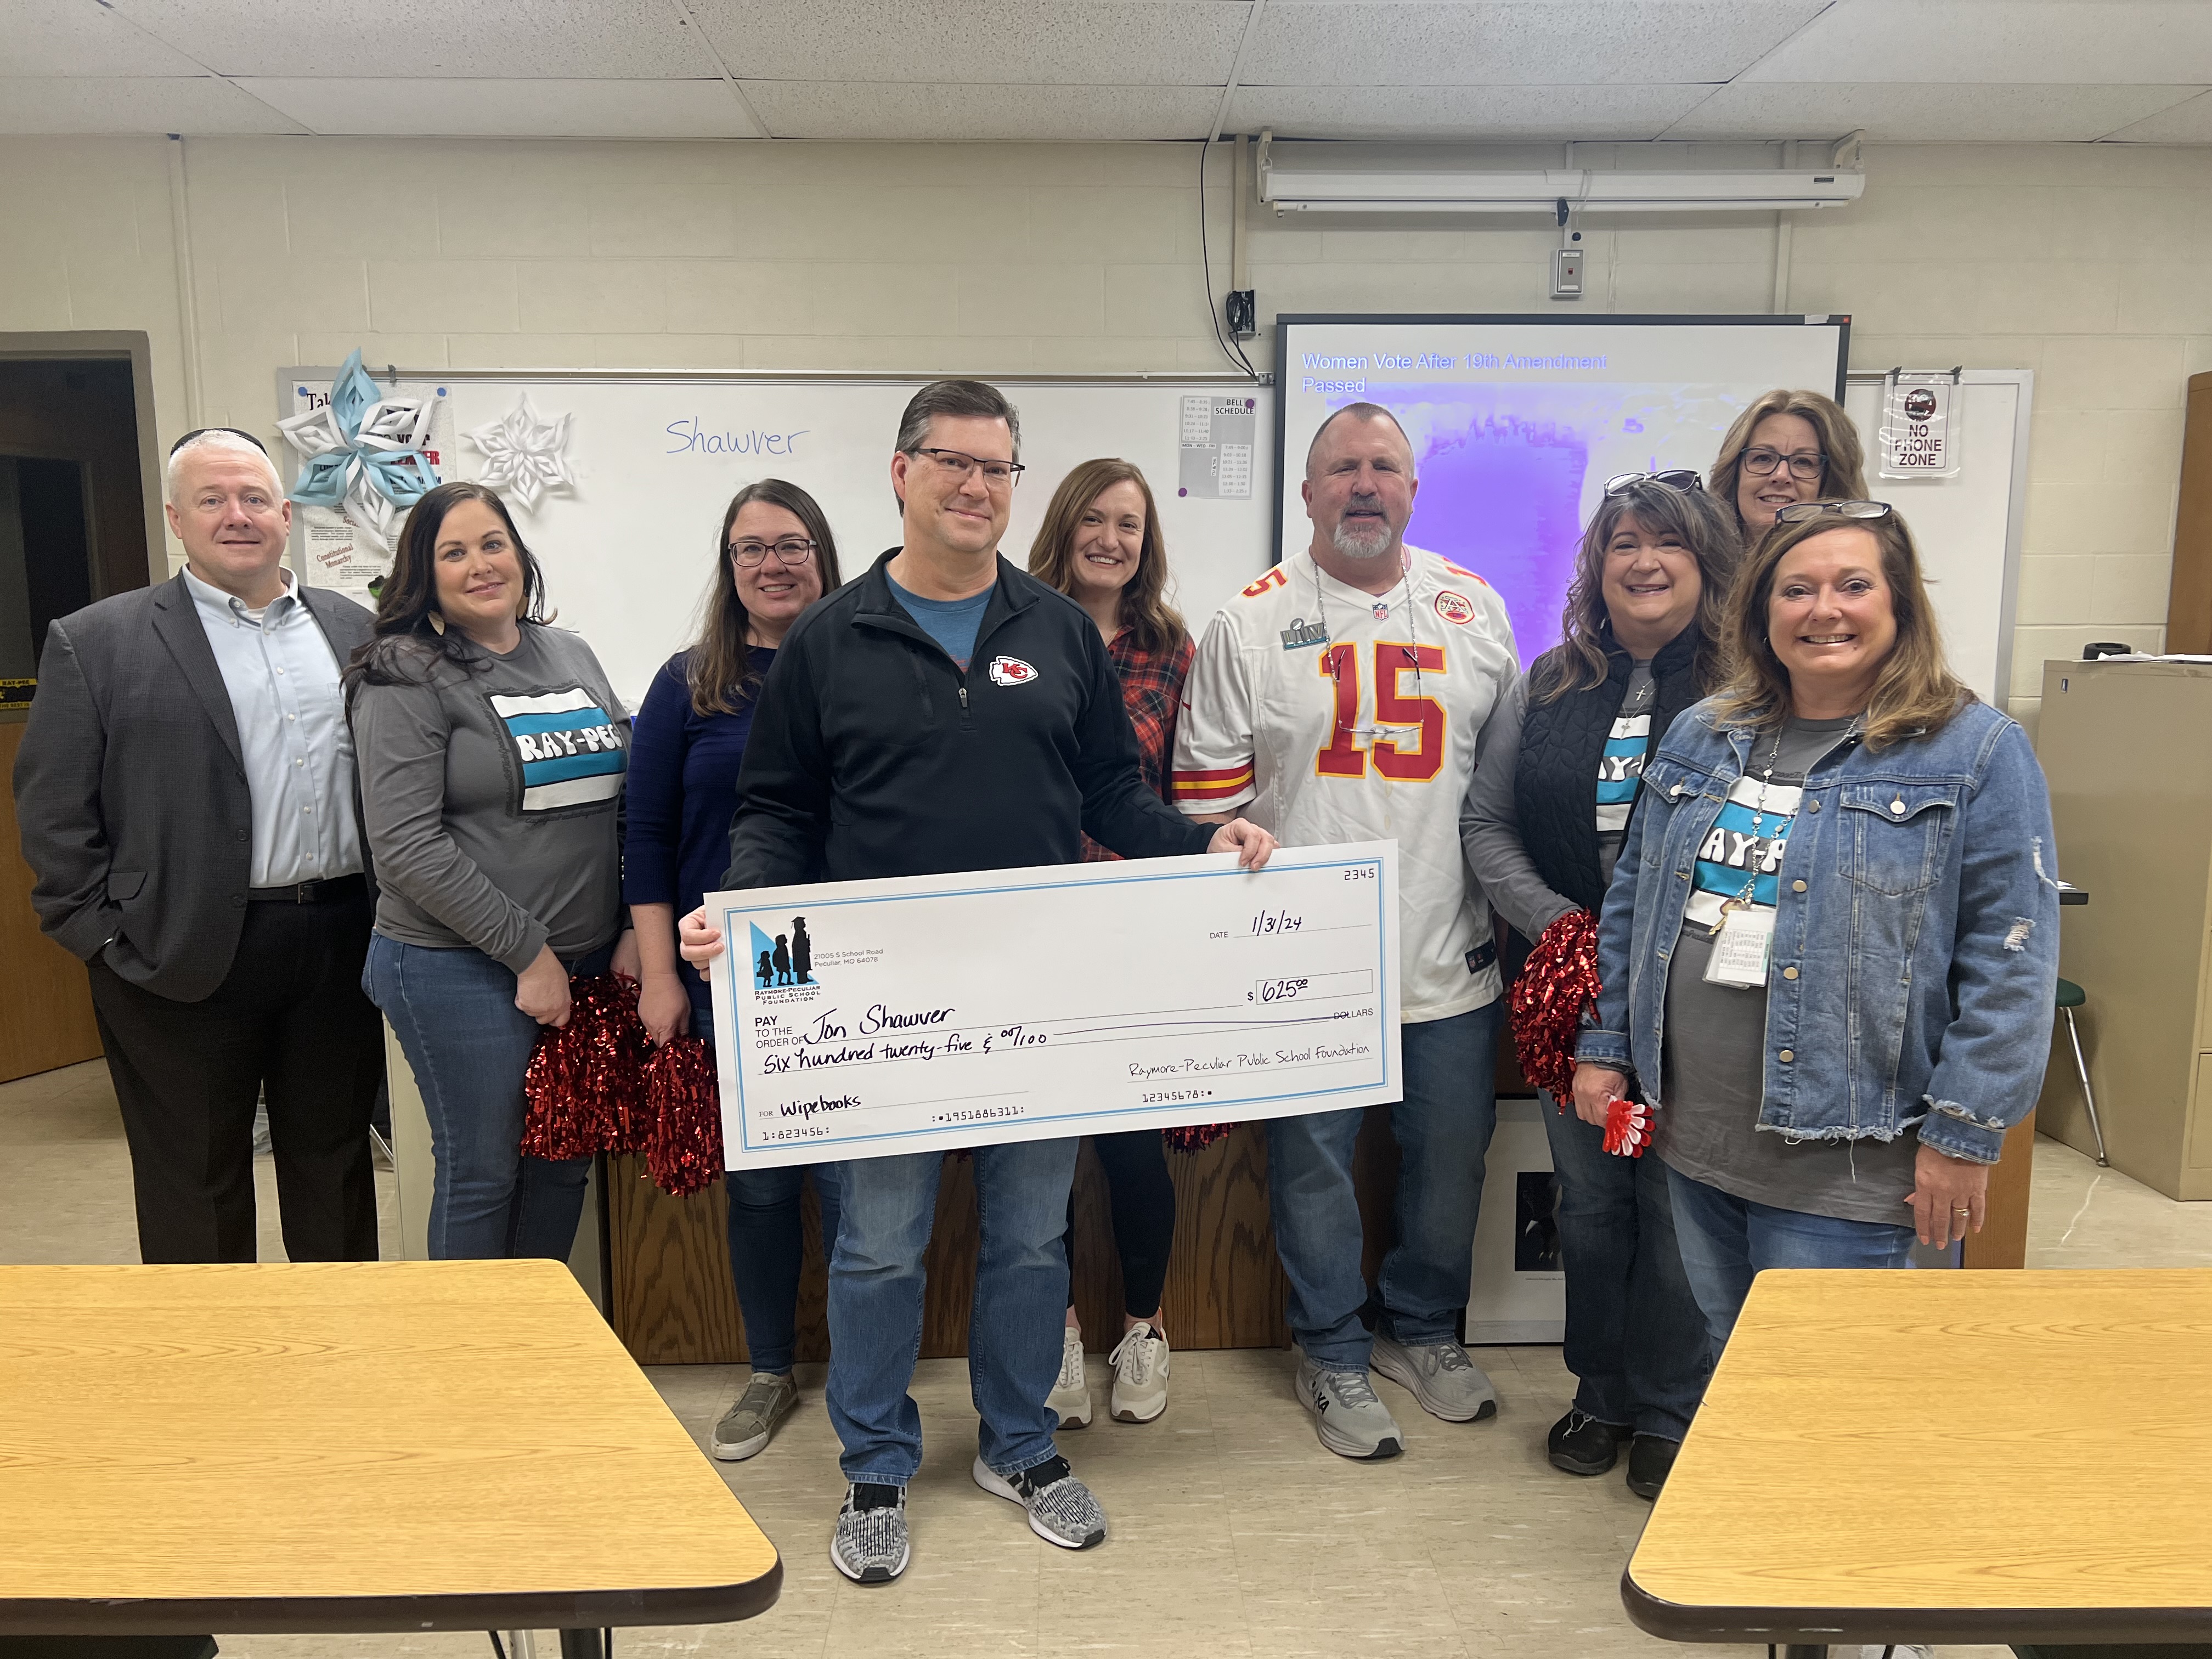 Teacher at Ray-Pec Academy, received a $625 grant to purchase wipebooks for use by students in grades 9-12